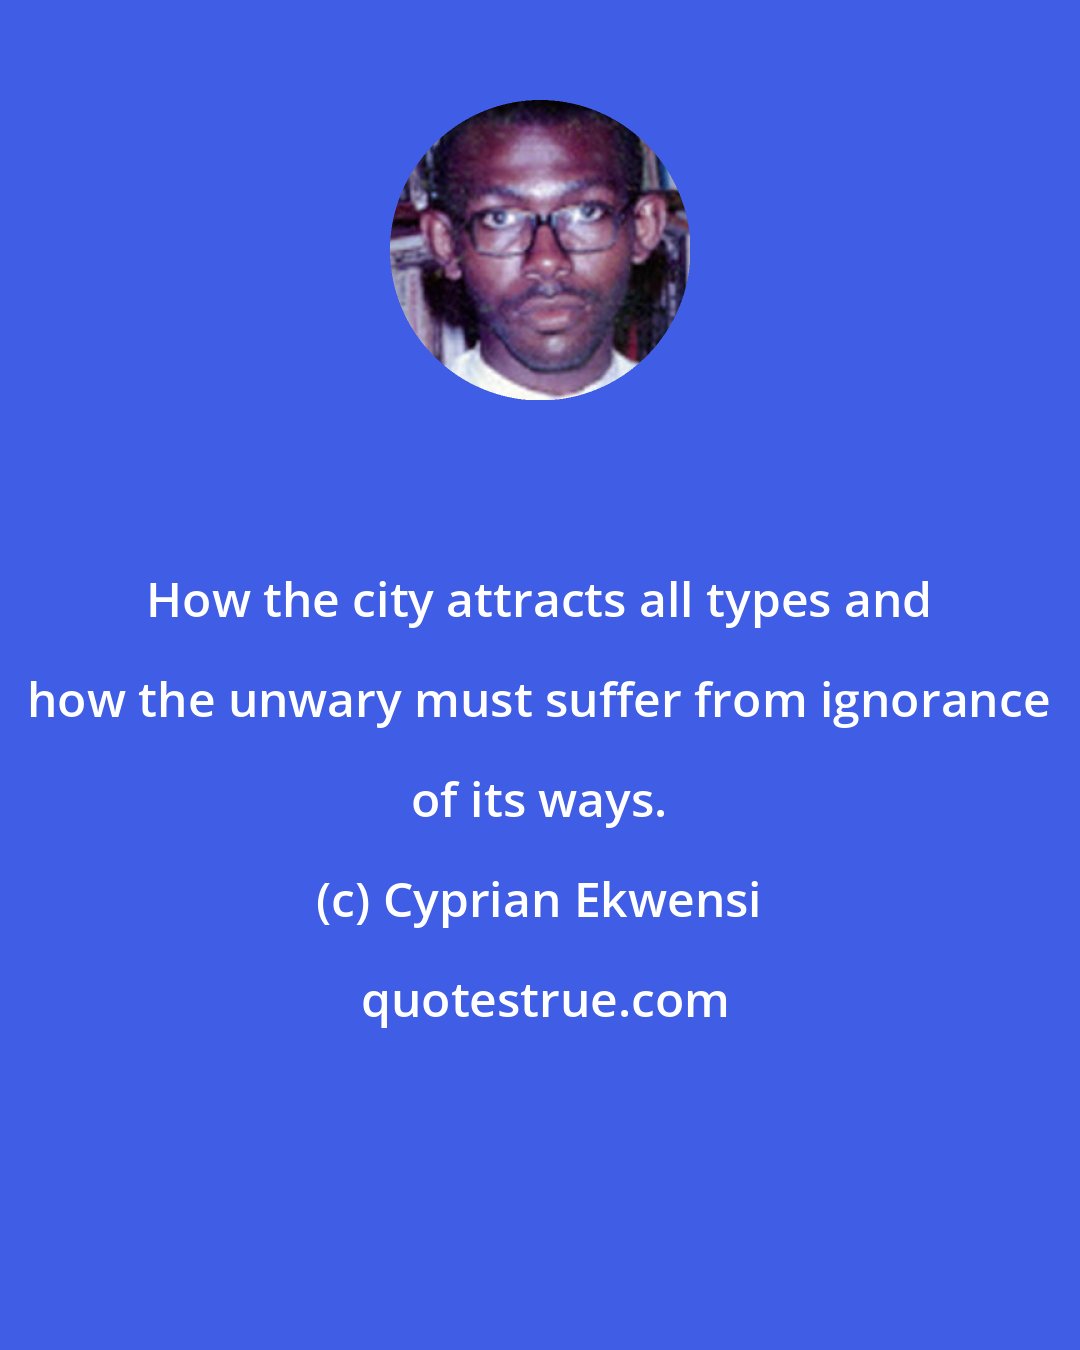 Cyprian Ekwensi: How the city attracts all types and how the unwary must suffer from ignorance of its ways.